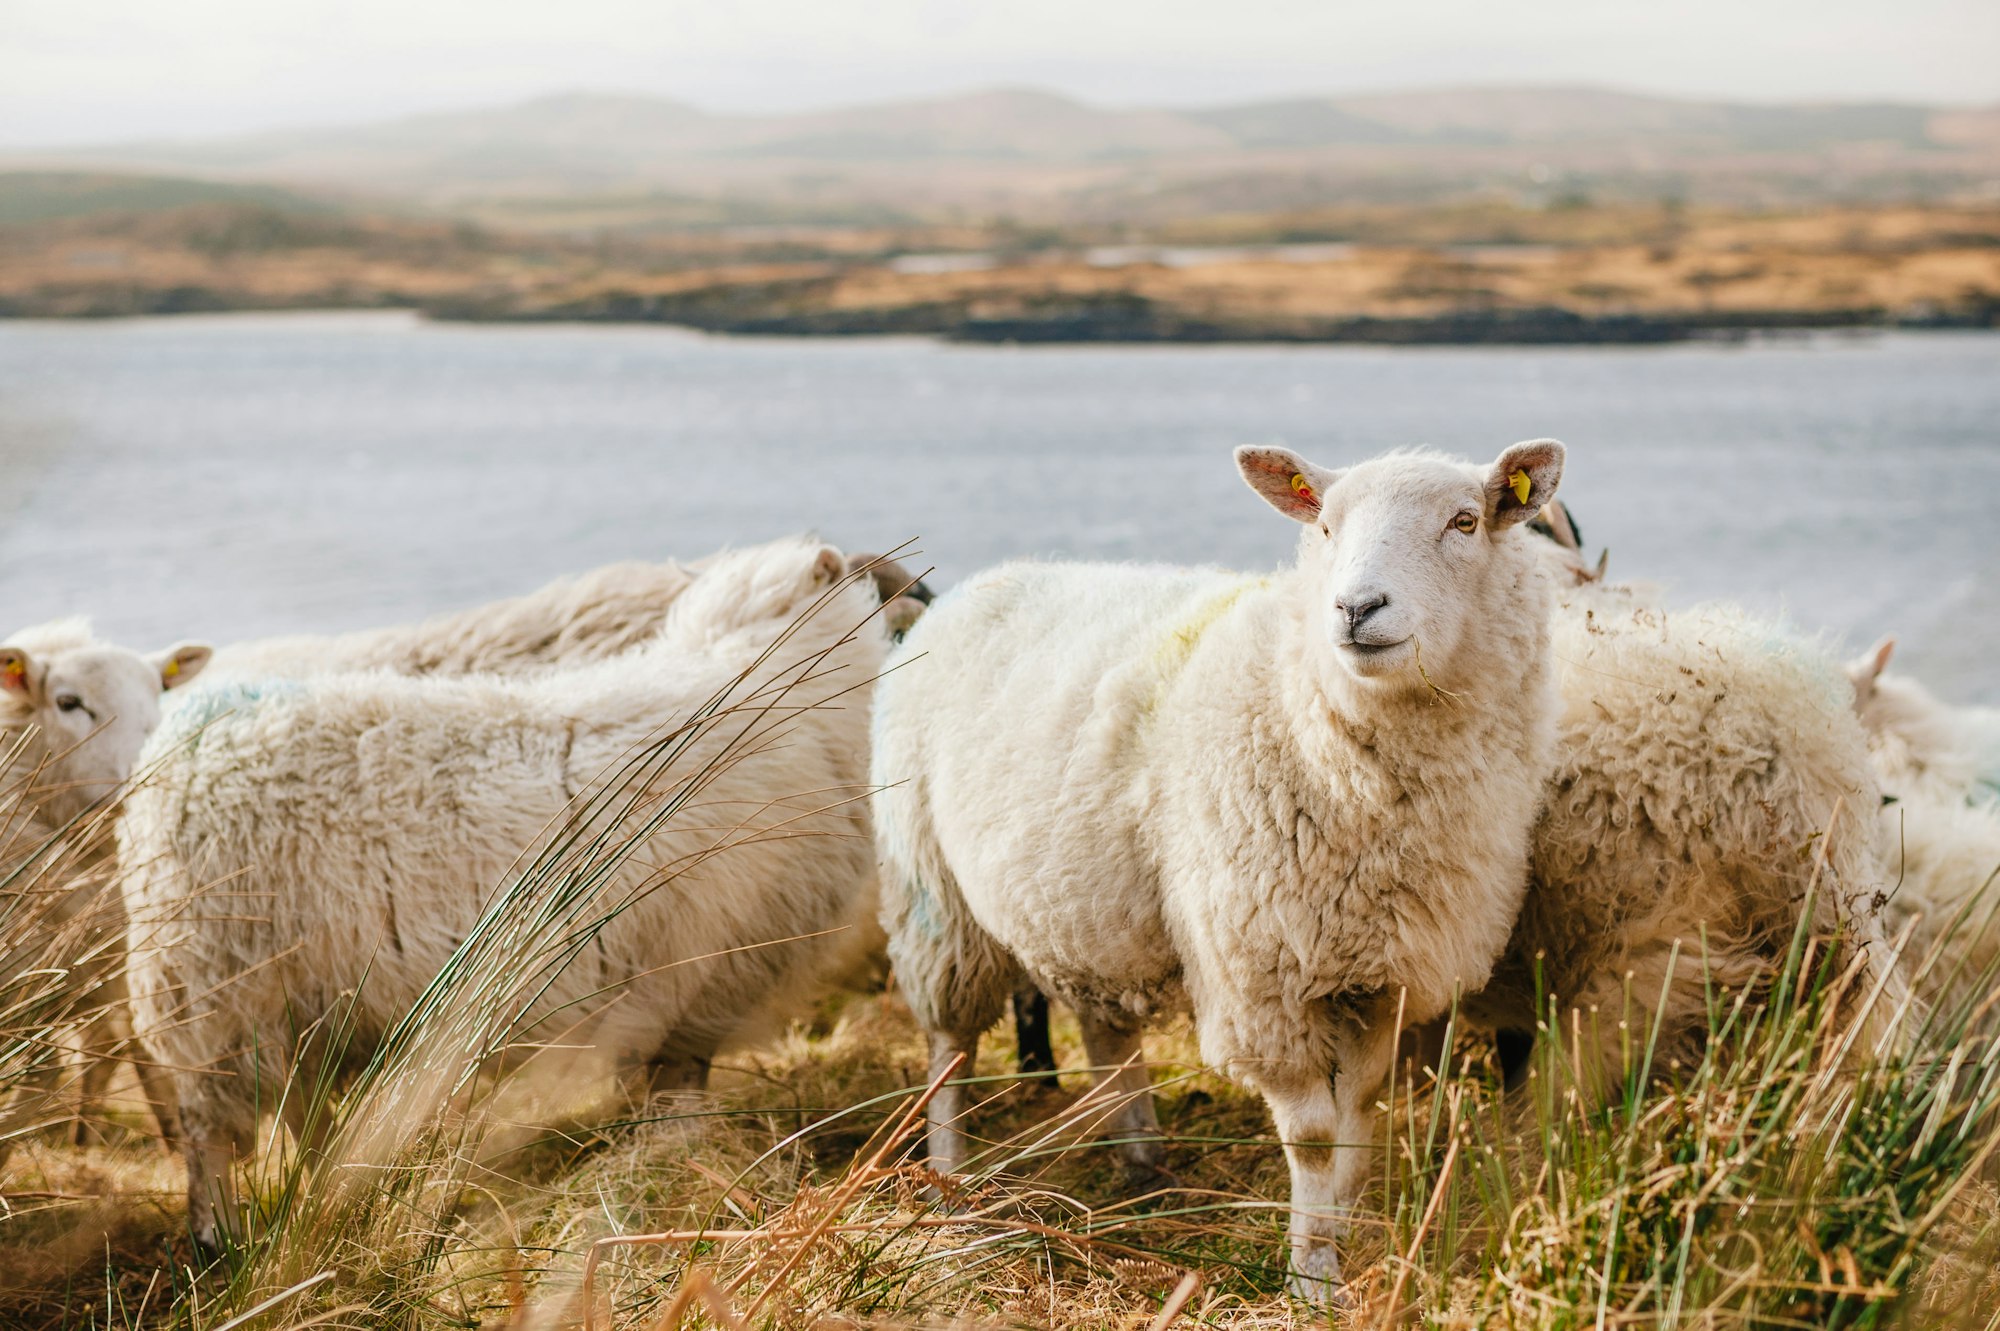 While hiking in Connemara National Park we encountered a herd of sheep. One of them was attracted to the camera and did this beautiful pose in front of the bay.